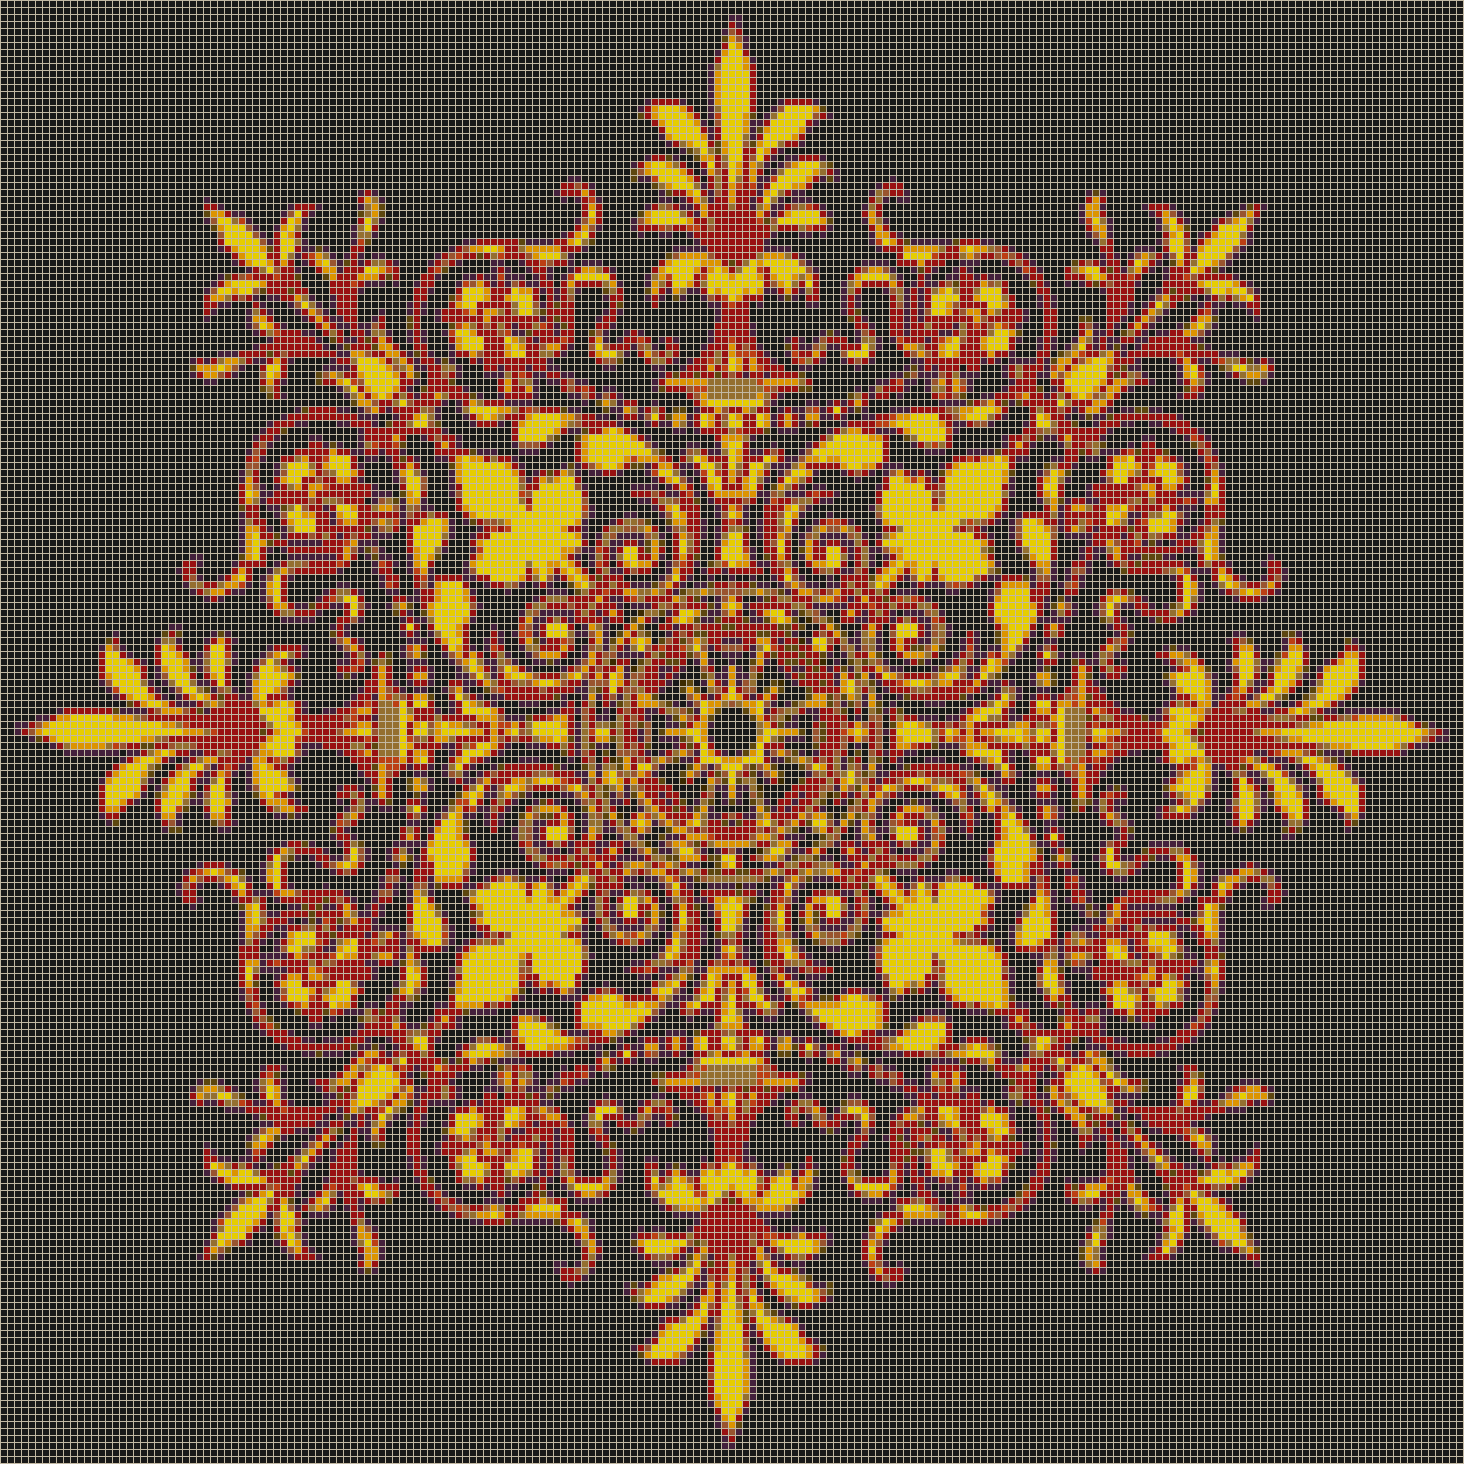 Victorian Ornament (Red-Yellow on Black) - Mosaic Tile Art